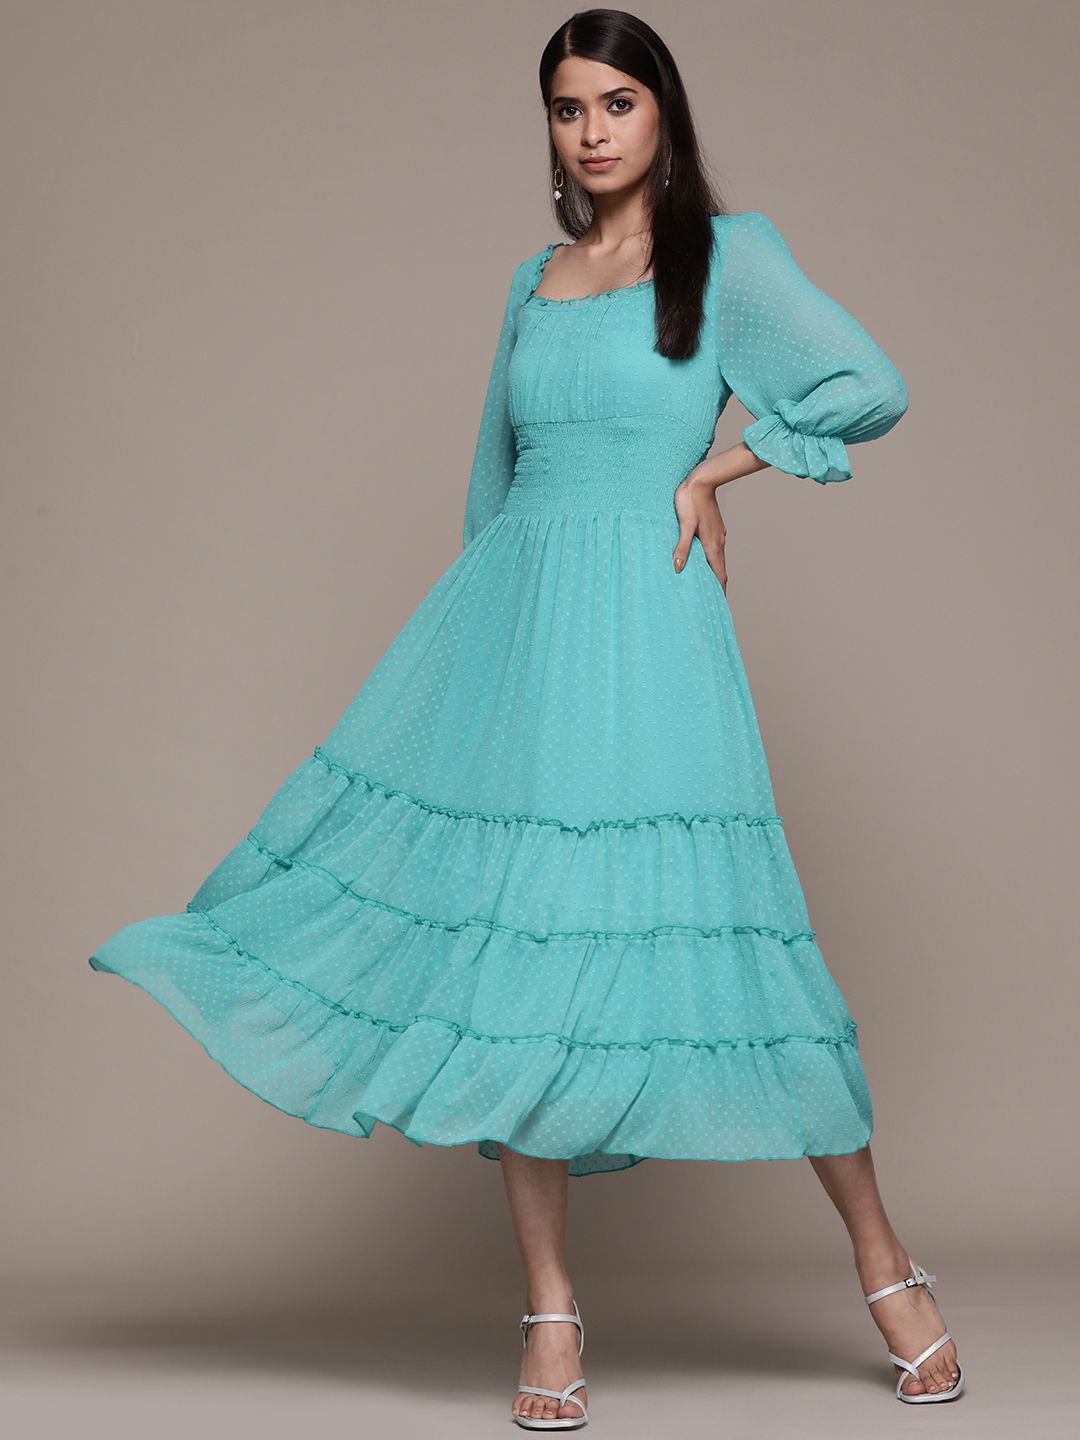 Antheaa Turquoise Blue Smocked Tiered Chiffon Midi Dress Price in India